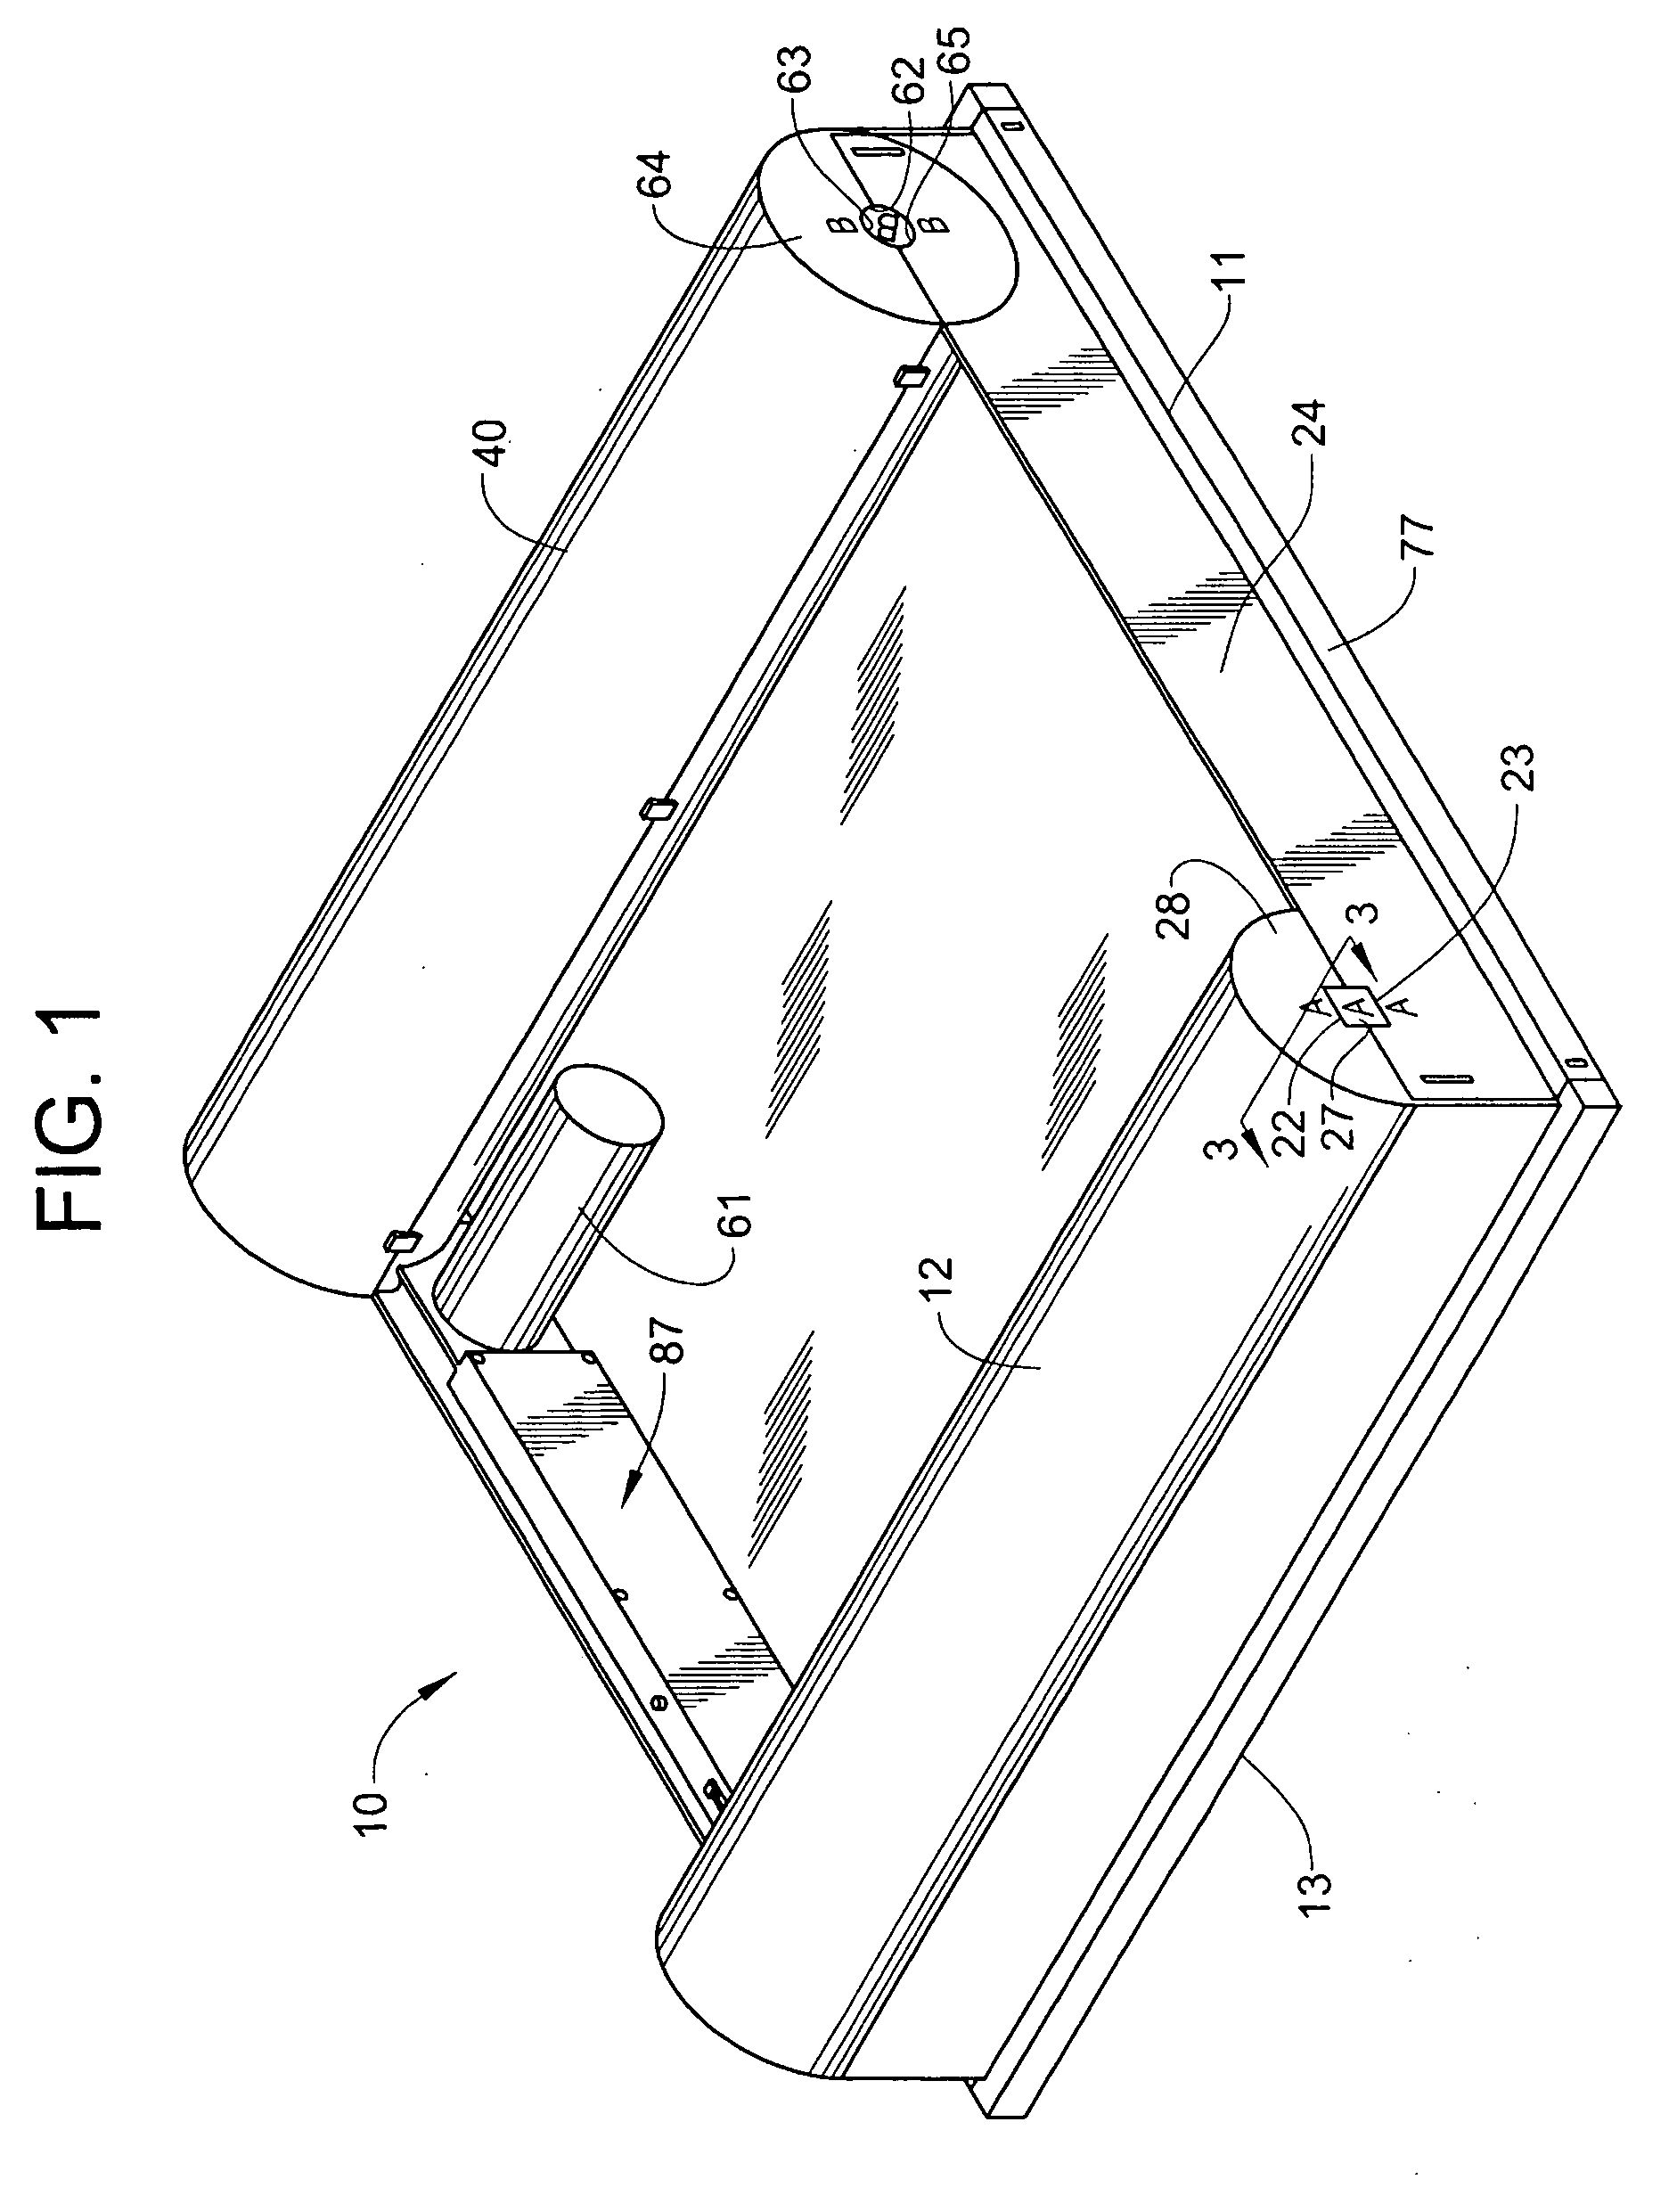 Filter apparatus and method